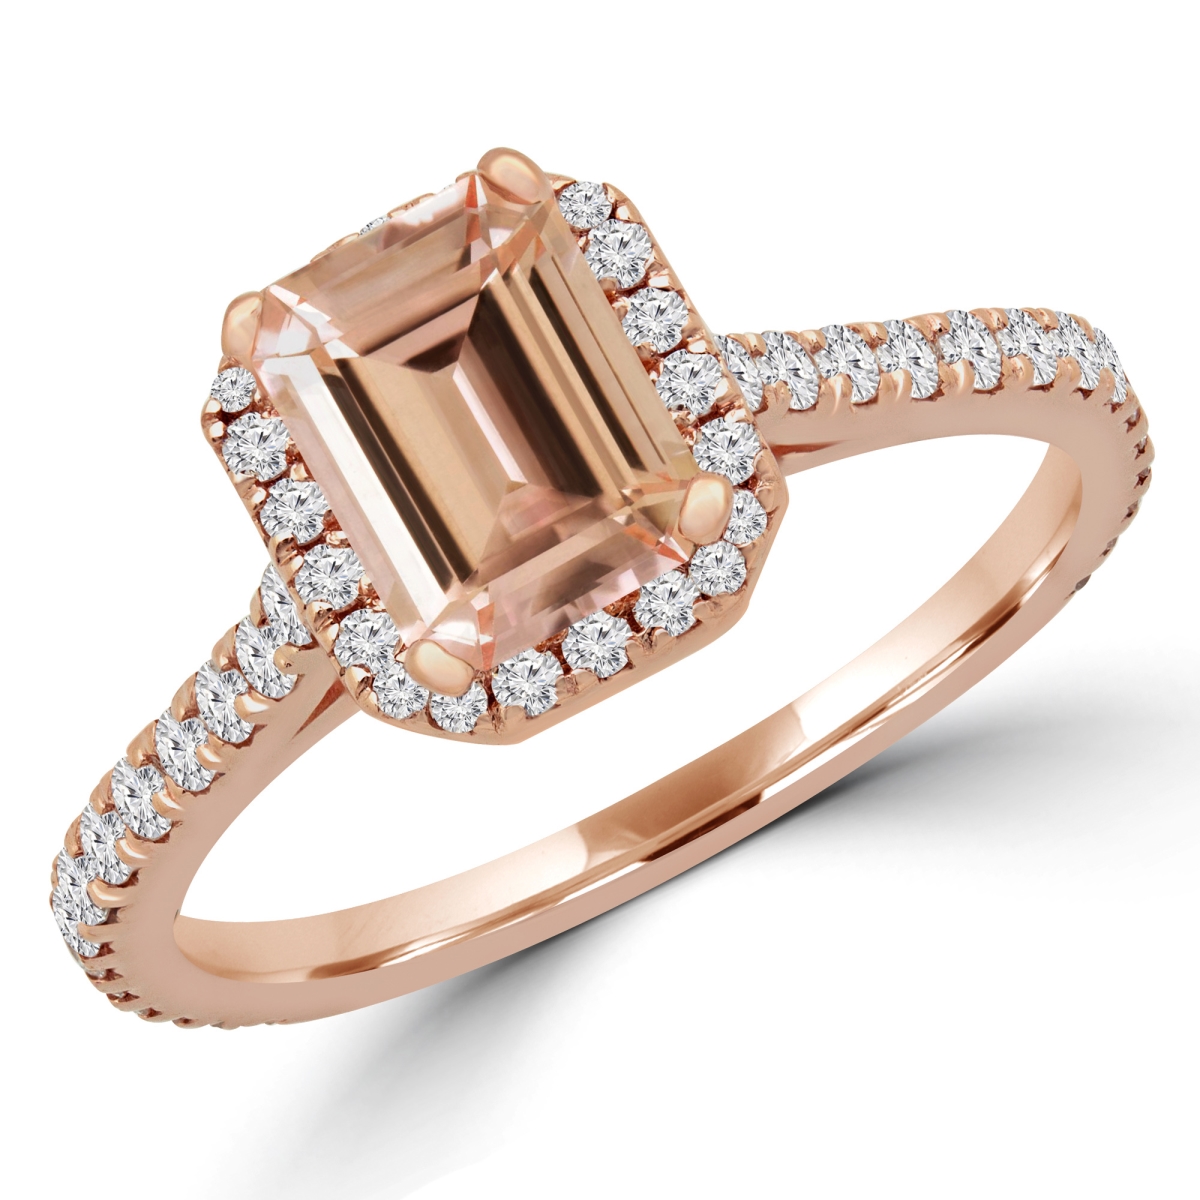 Picture of Majesty Diamonds MD180580-5 1.25 CTW Emerald Pink Morganite Halo Engagement Ring in 14K Rose Gold - Size 5